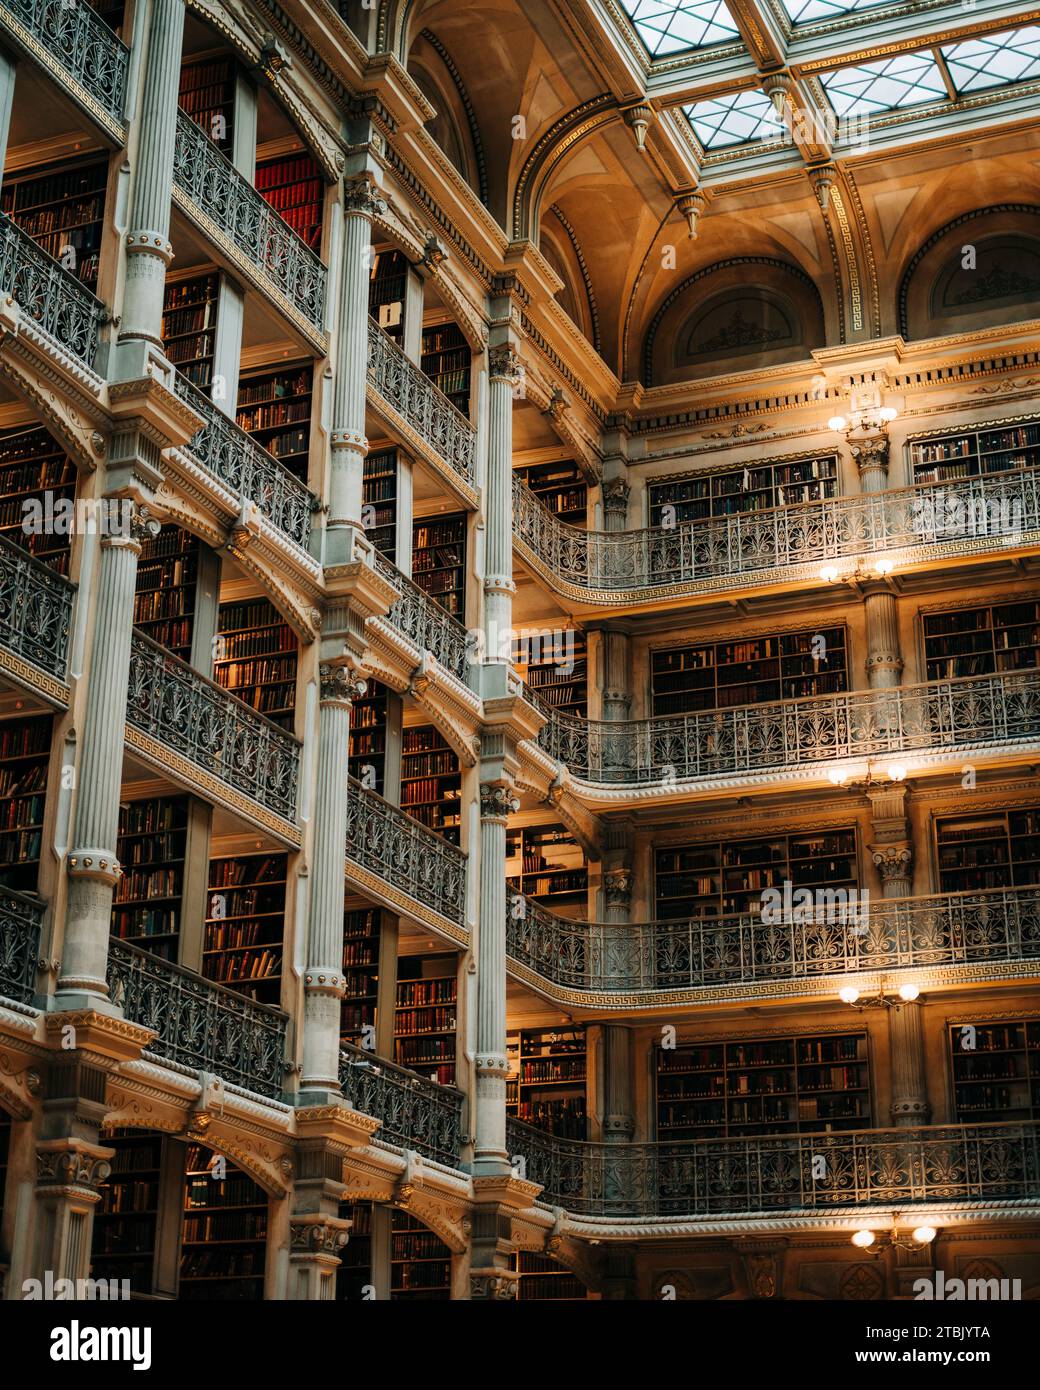 Interior architecture of the George Peabody Library in Mount Vernon, Baltimore, Maryland Stock Photo